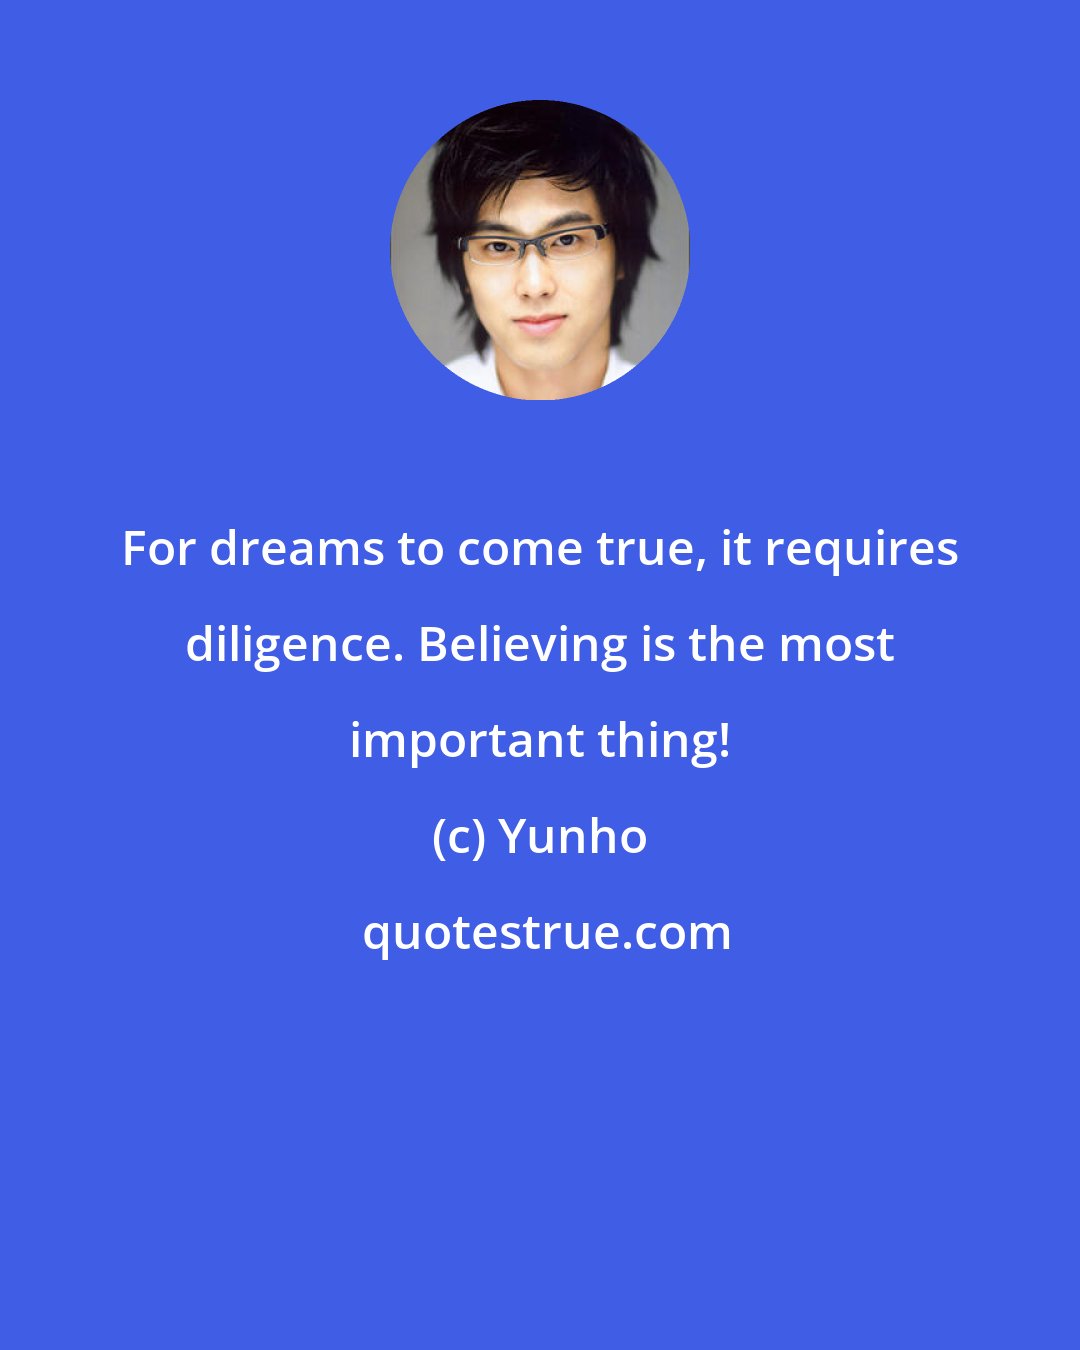 Yunho: For dreams to come true, it requires diligence. Believing is the most important thing!